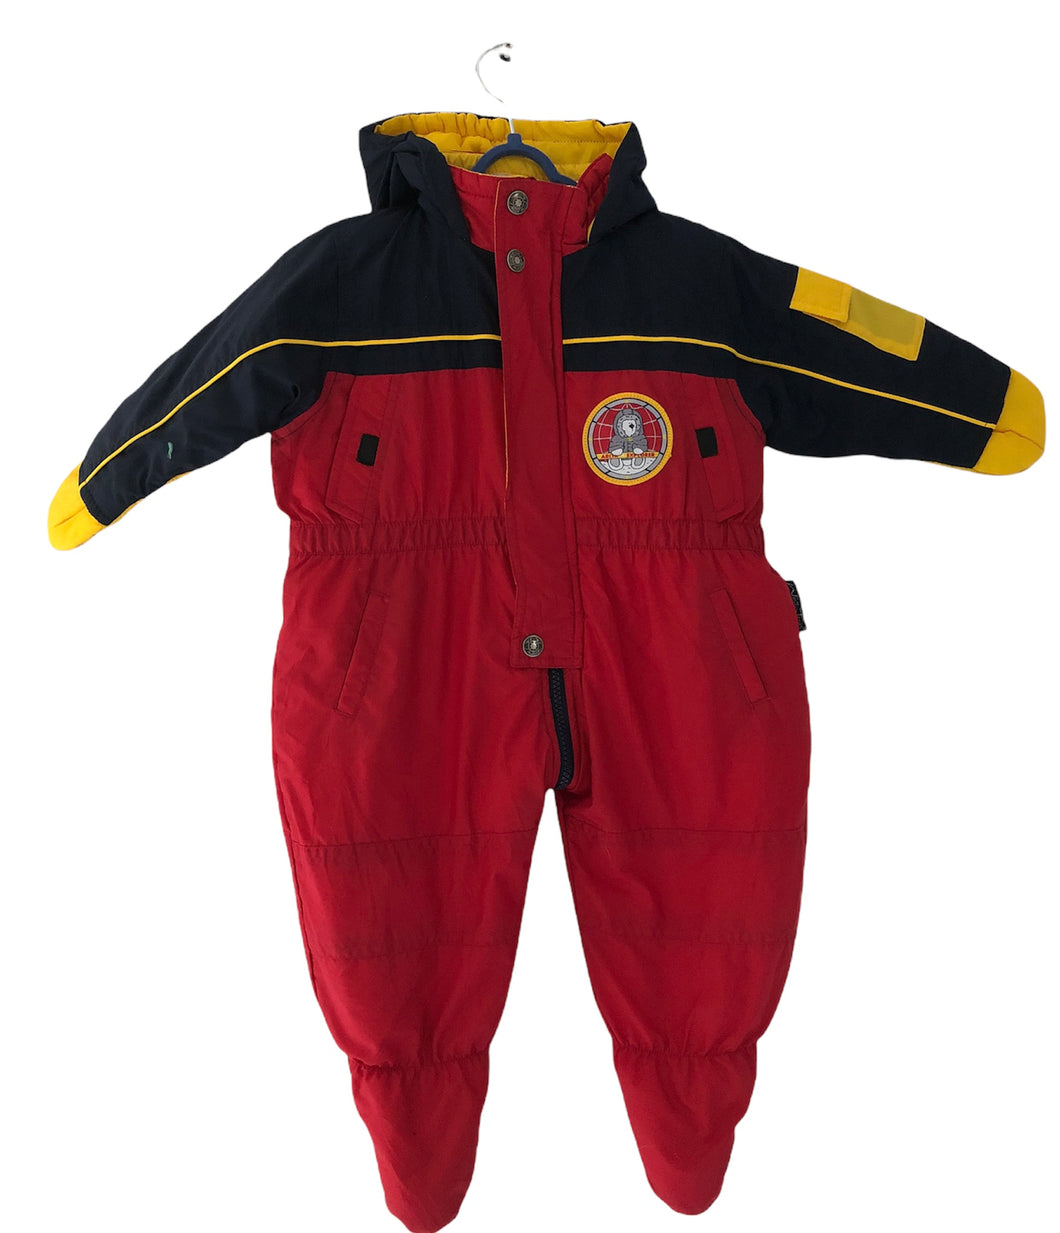 Vintage Baby Padded Snowsuit Age 6-9 months